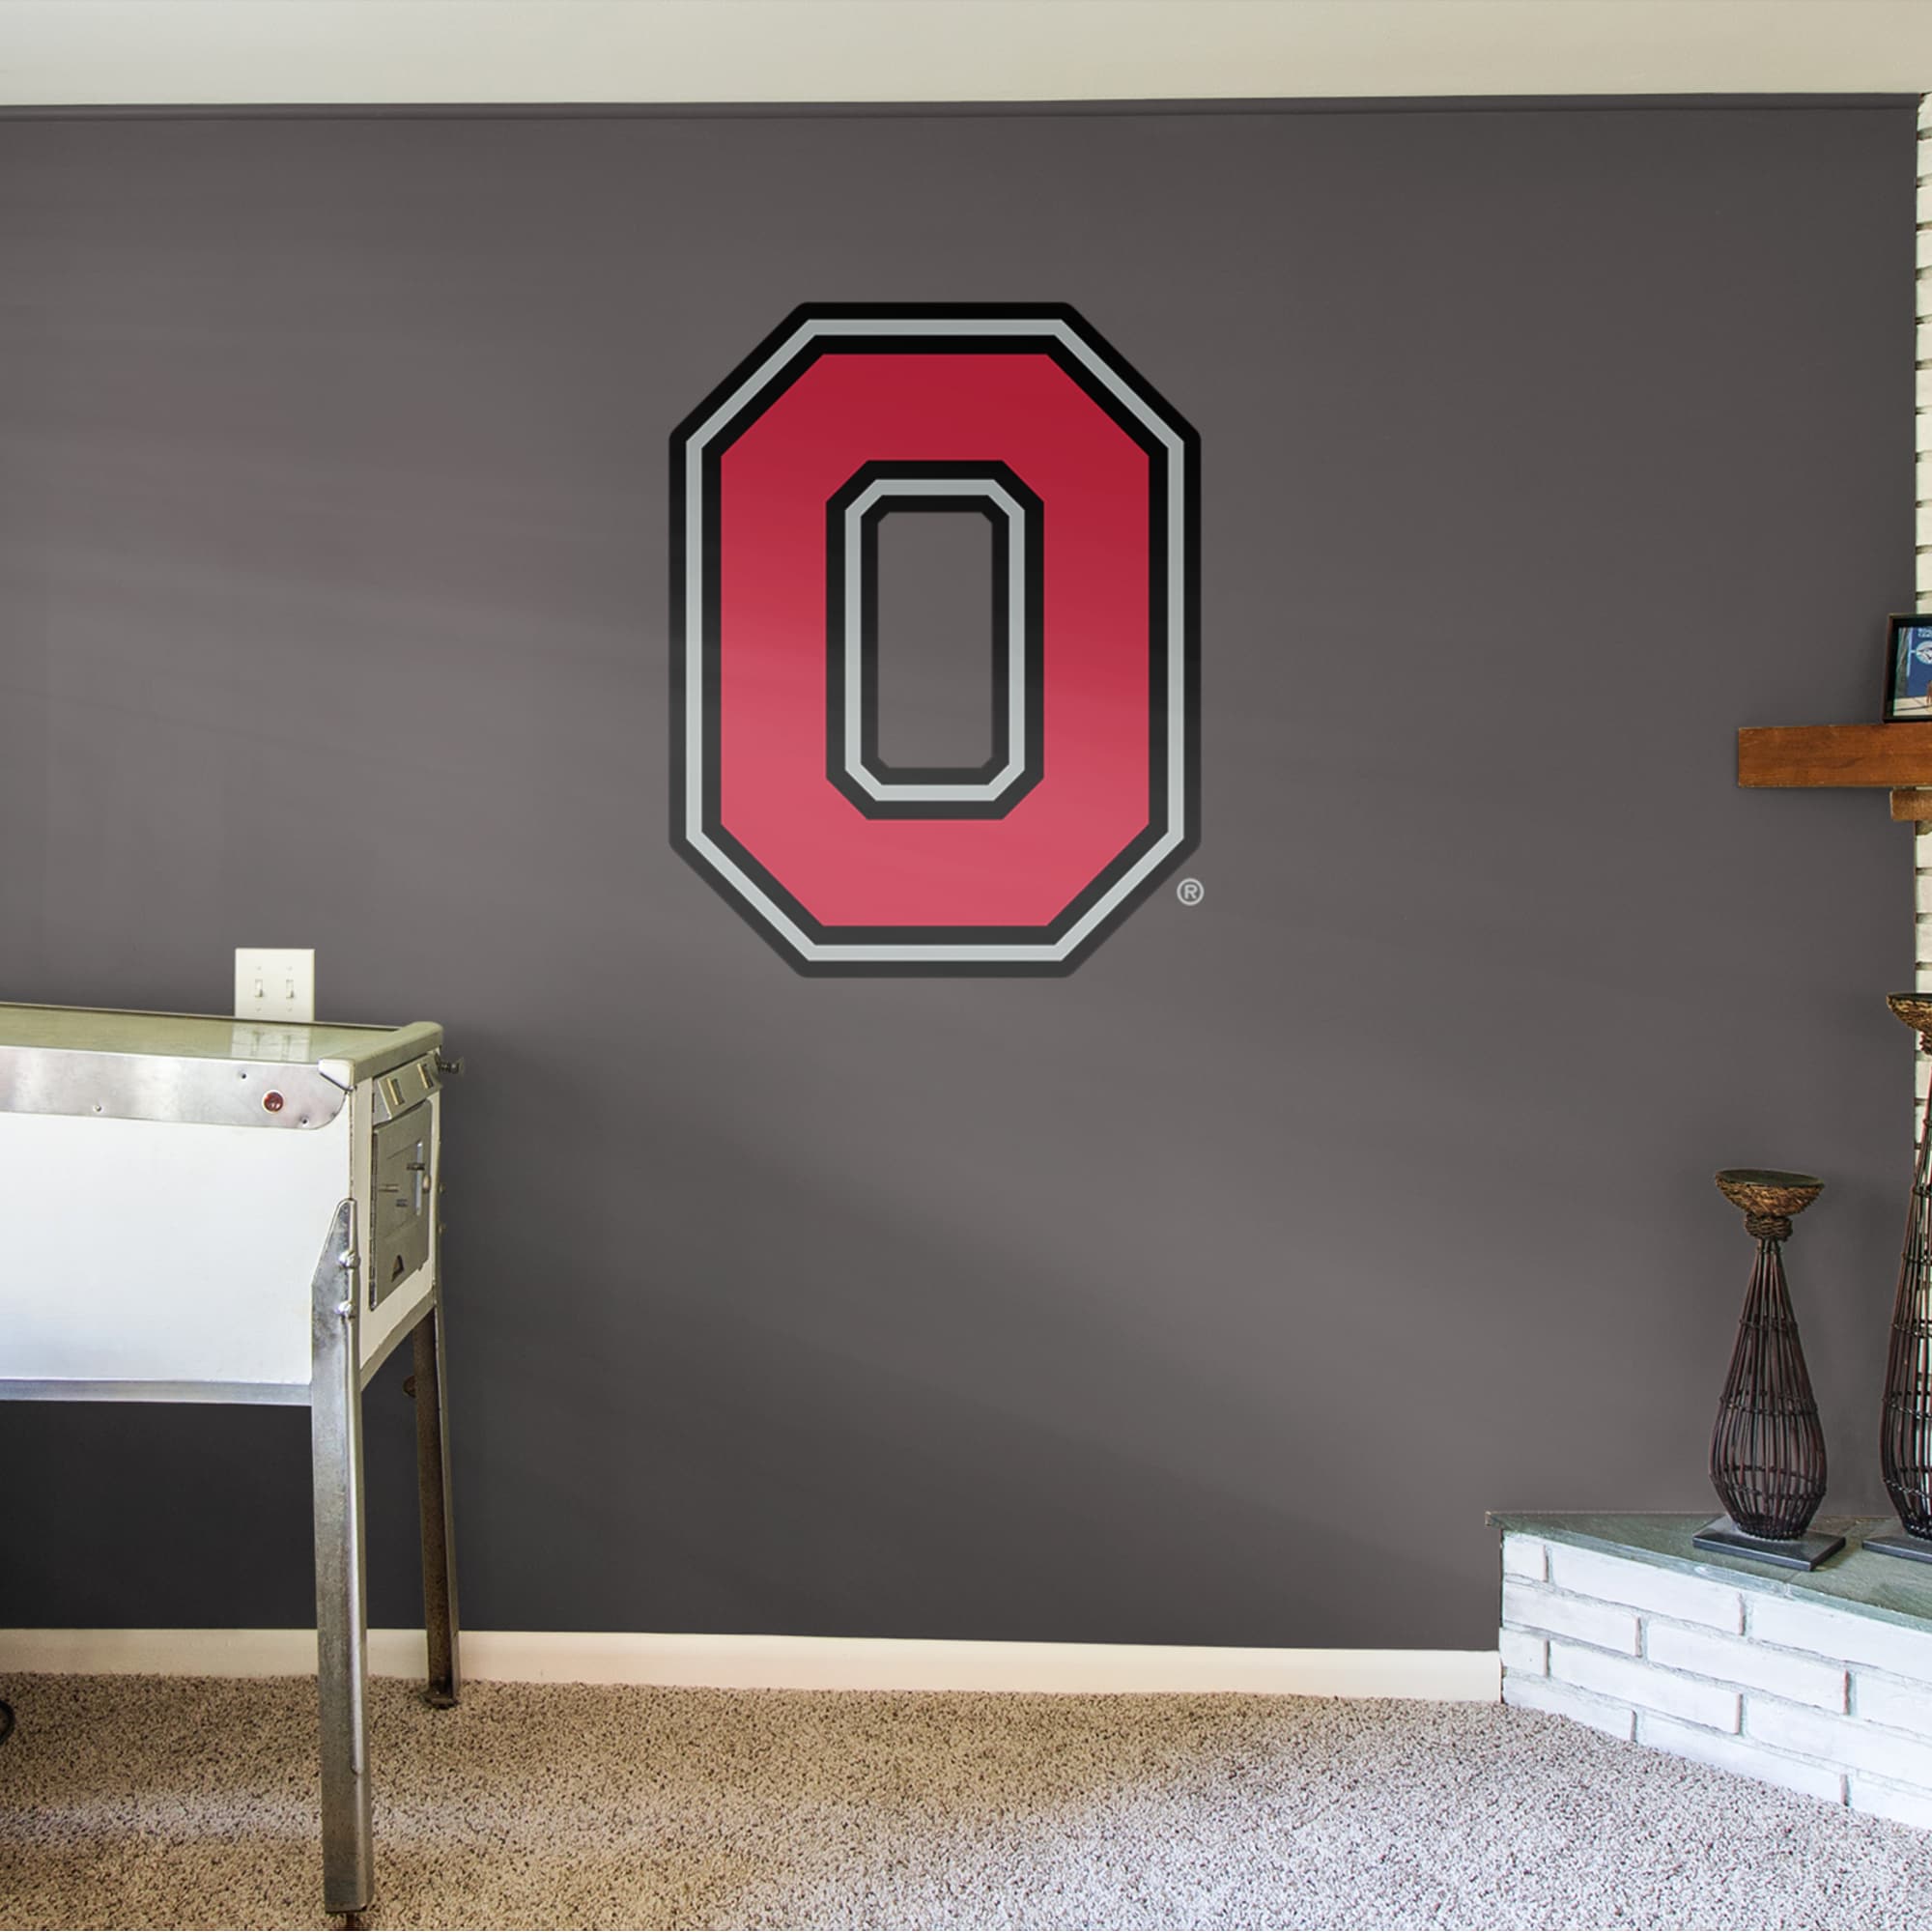 Ohio State Buckeyes: Block O Logo - Officially Licensed Removable Wall Decal 33.0"W x 42.0"H by Fathead | Vinyl